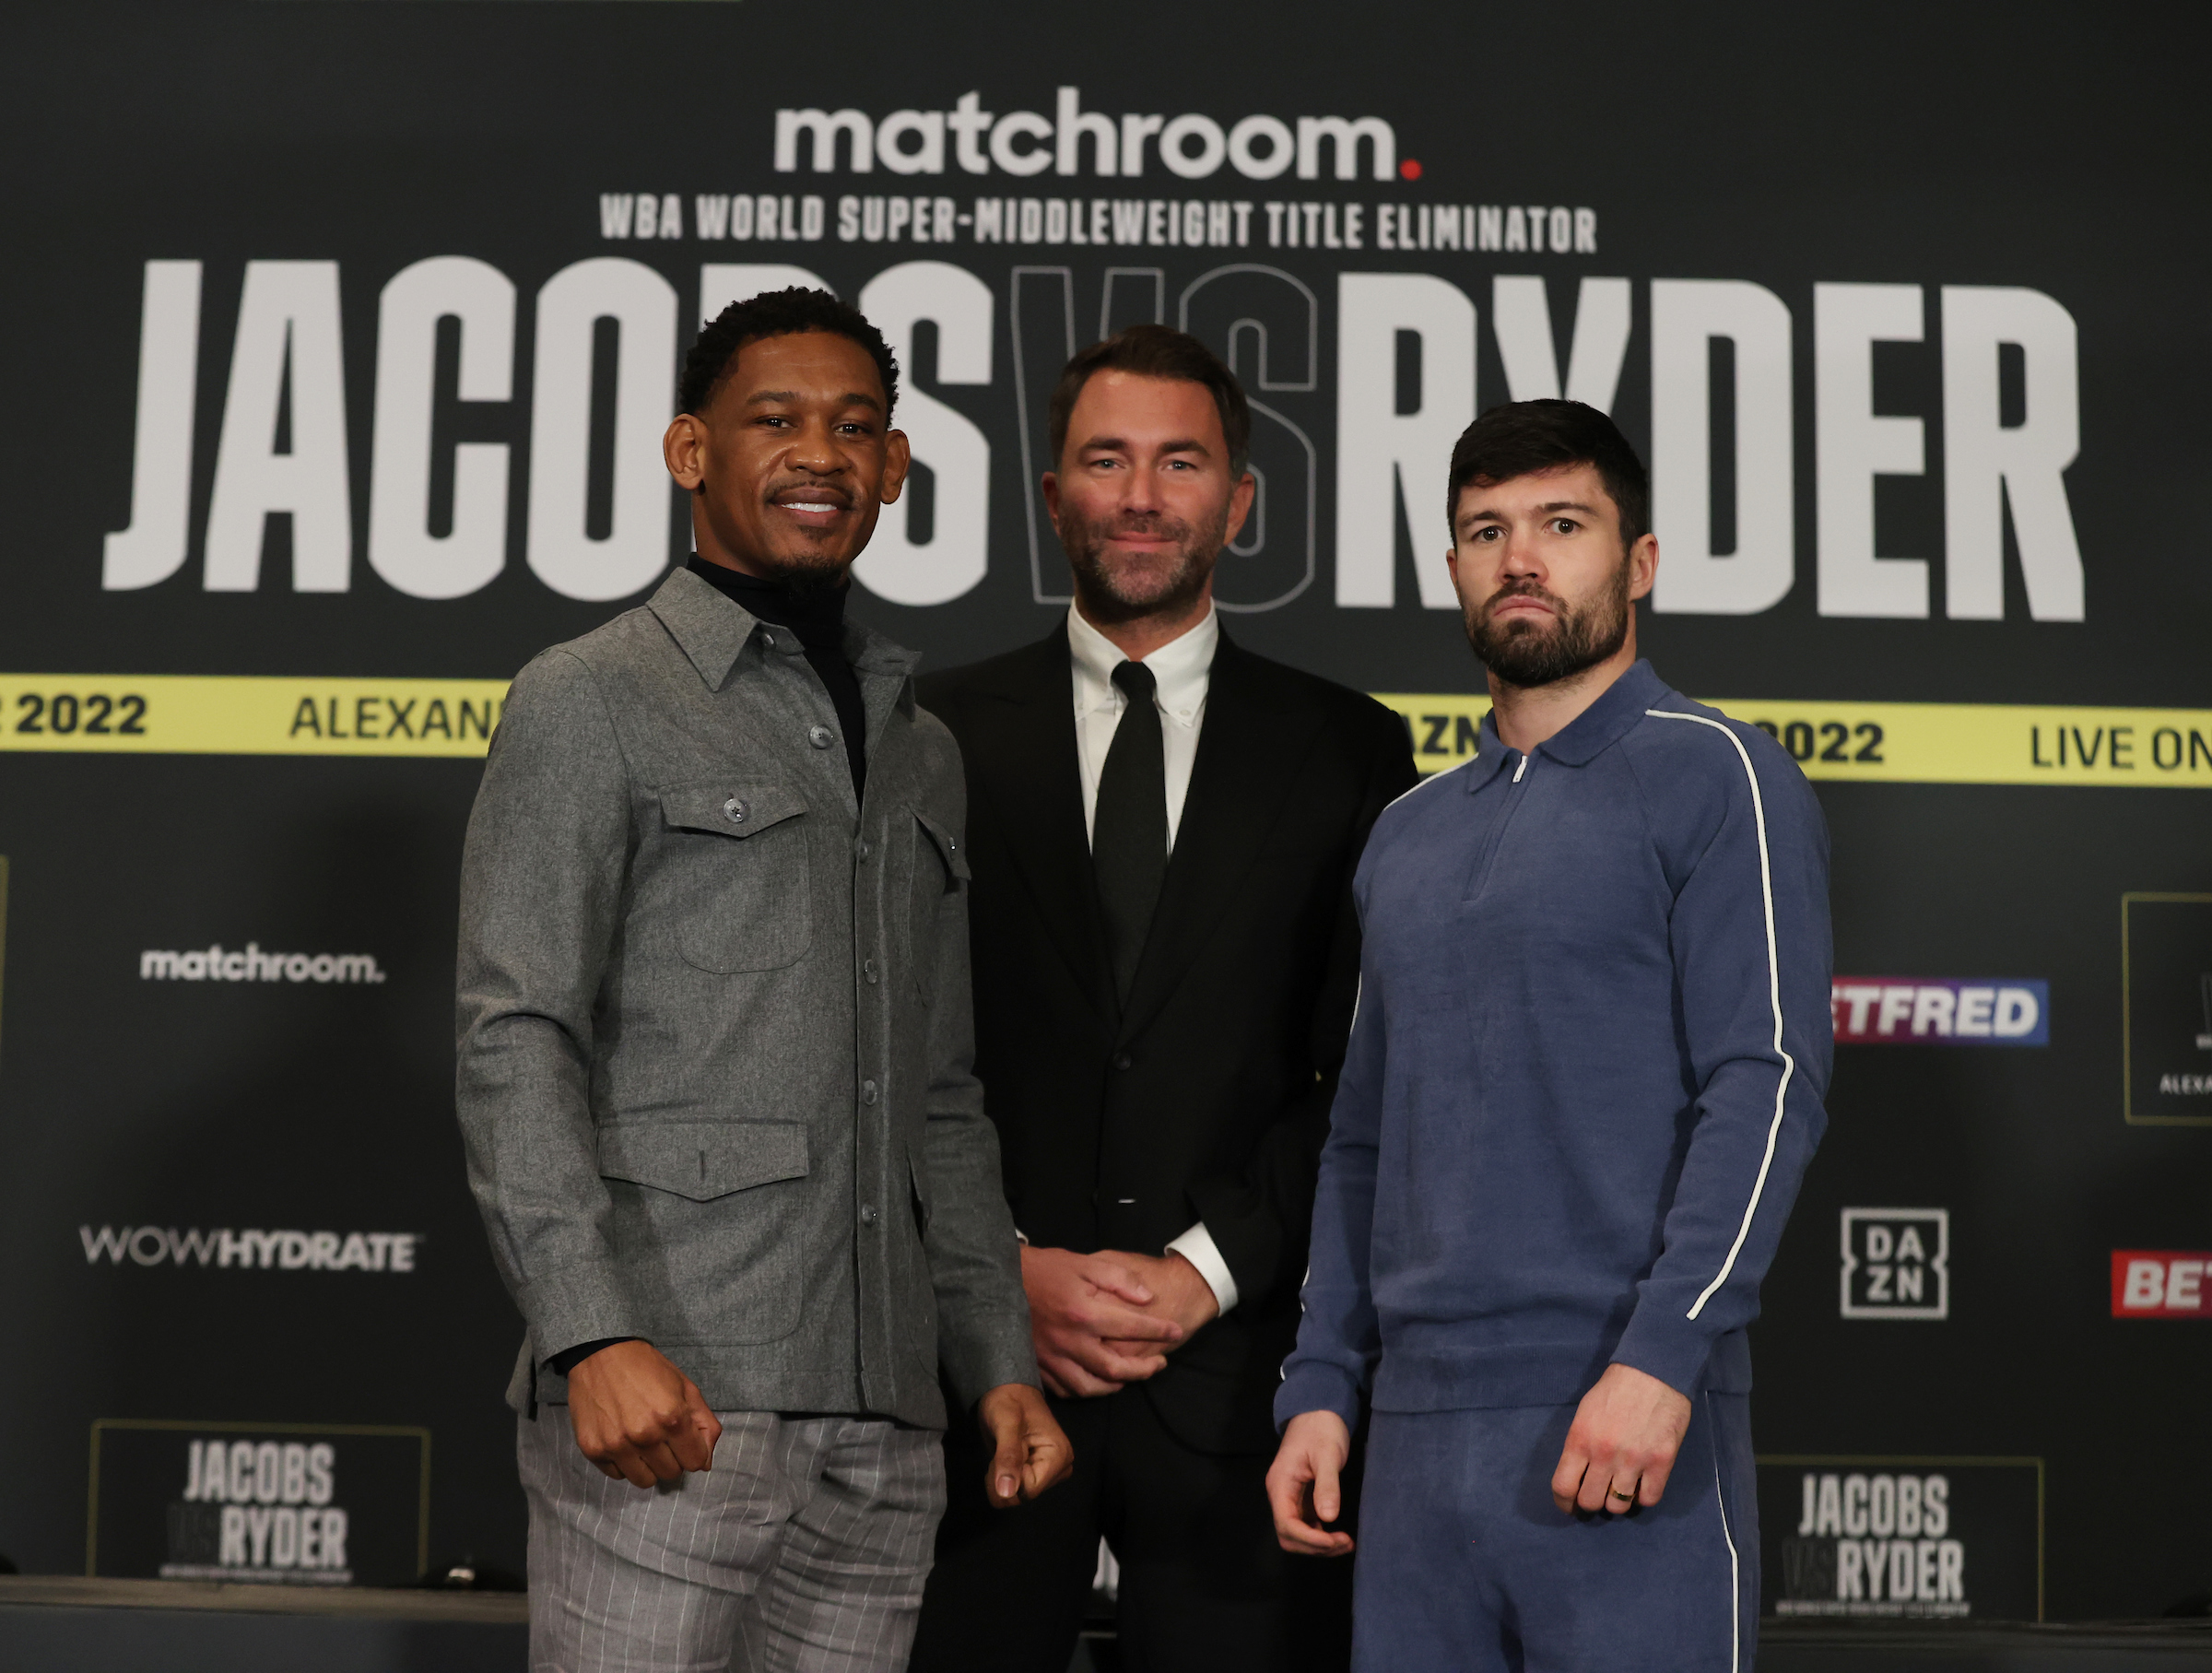 Daniel Jacobs and John Ryder both need to win on Saturday. Who will?